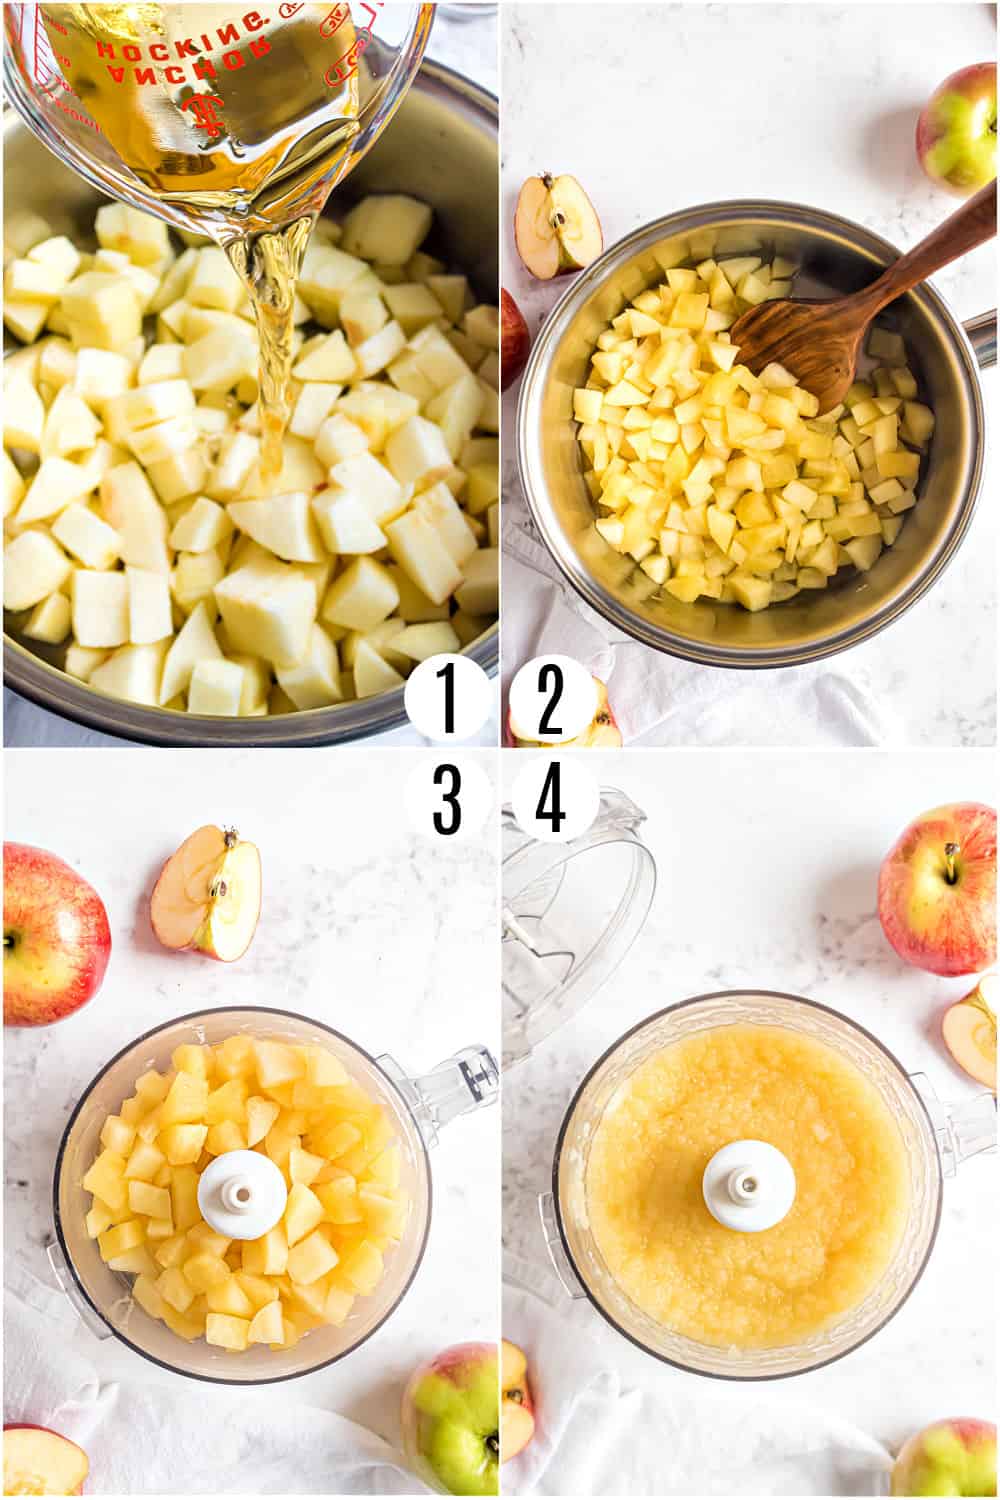 Step by step photos showing how to make homemade applesauce.